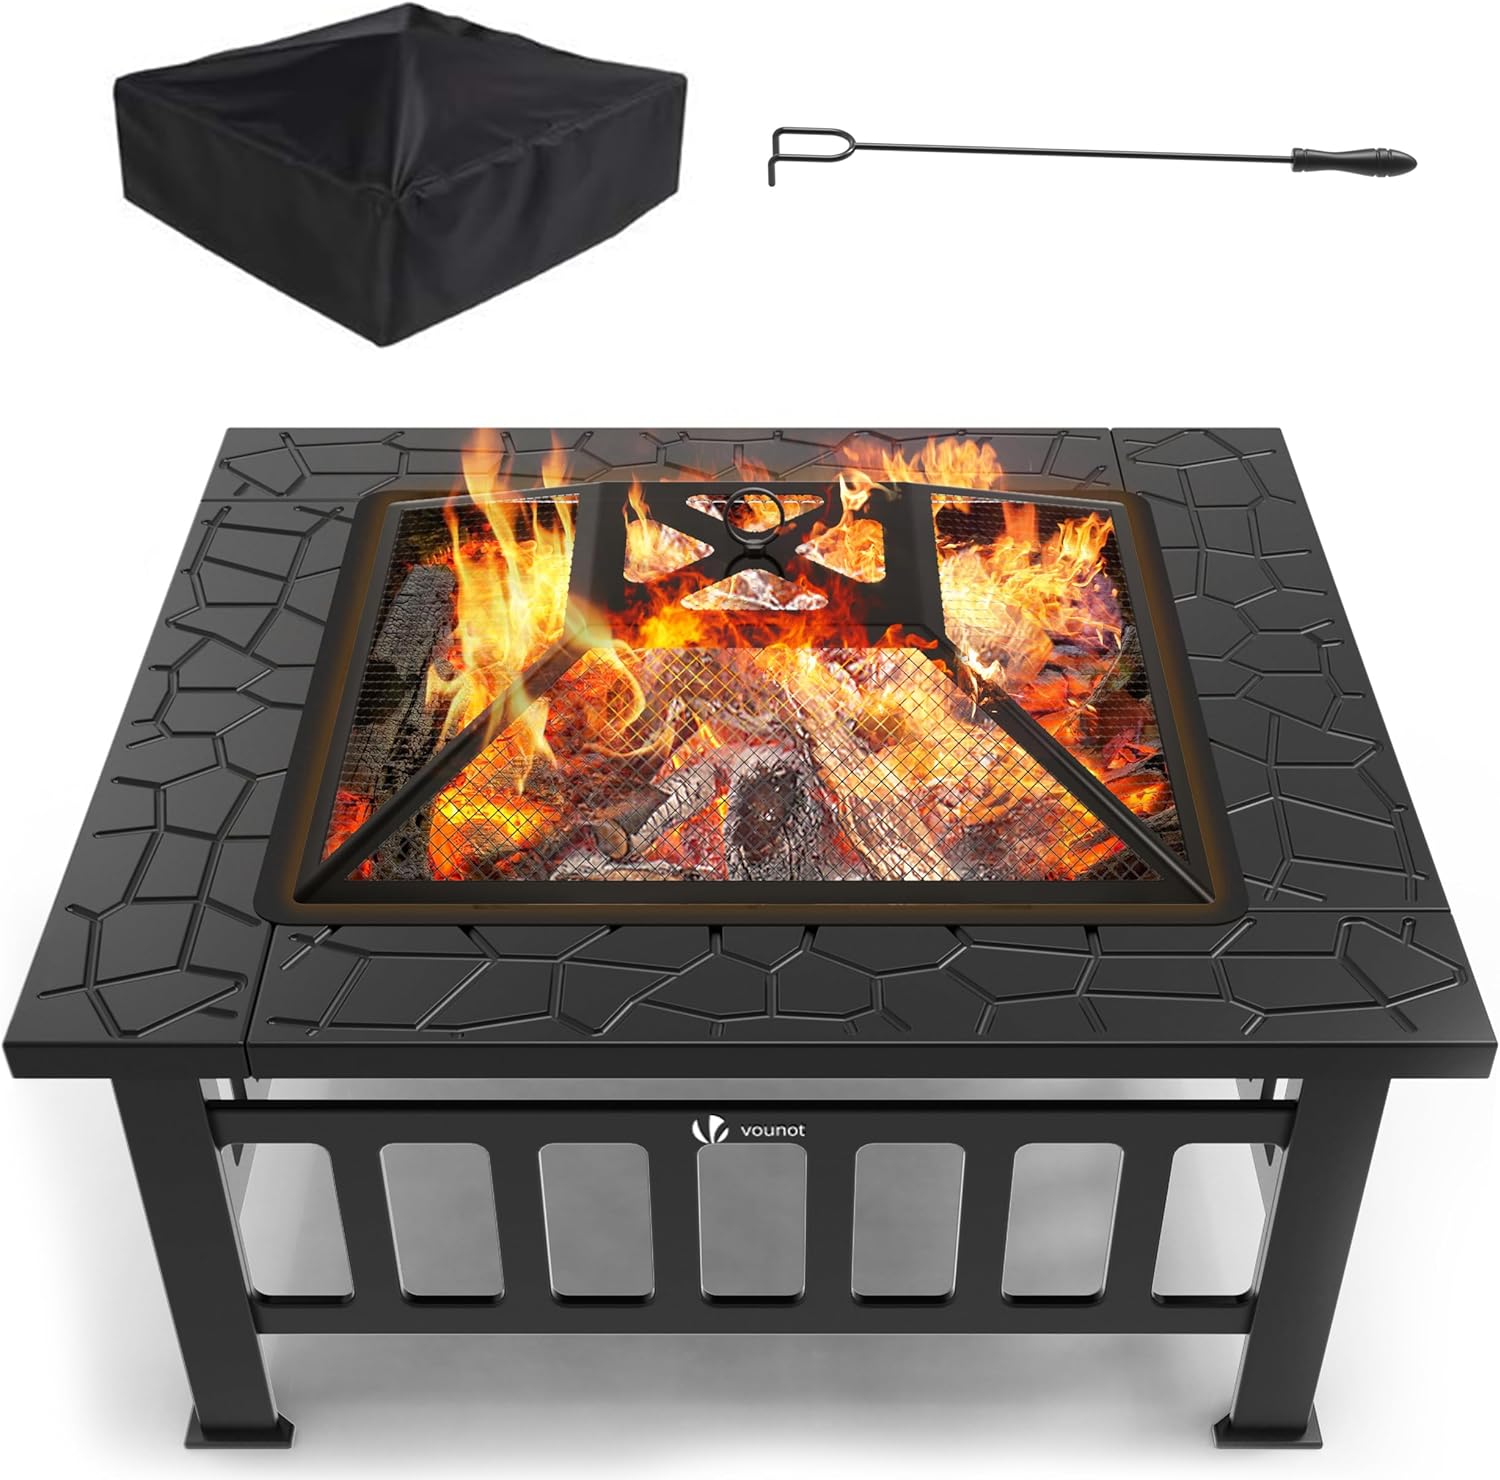 3 in 1 Metal Square Firepit 32 inch Heavy Duty Fire Pit Table Outside Wood Burning Fire Pits with Spark Screen Lit and Rain Cover for Camping Garden Patio, Black